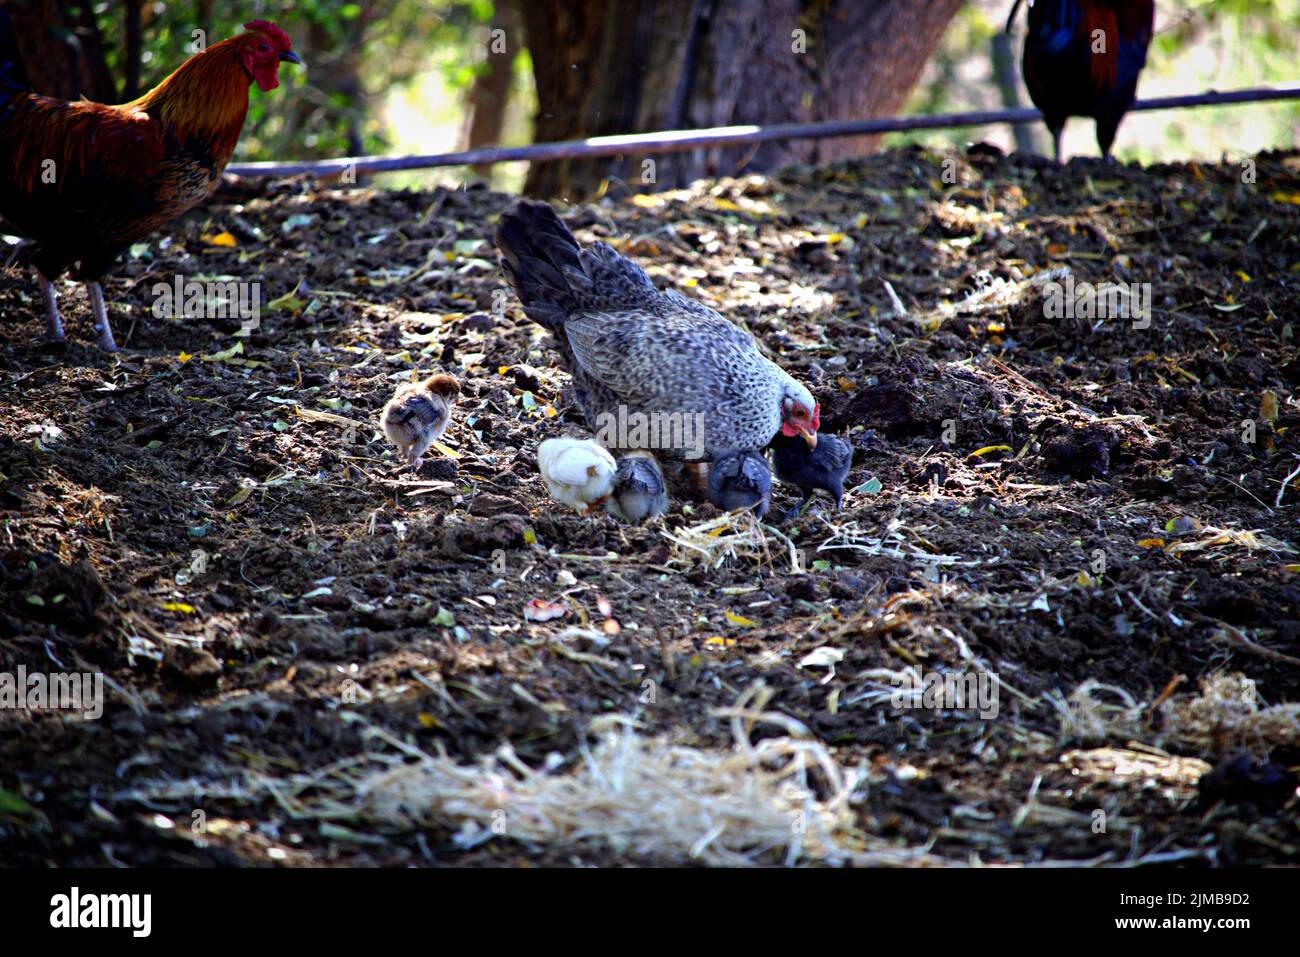 A chicken pasturing on a farm with other landfowl Stock Photo